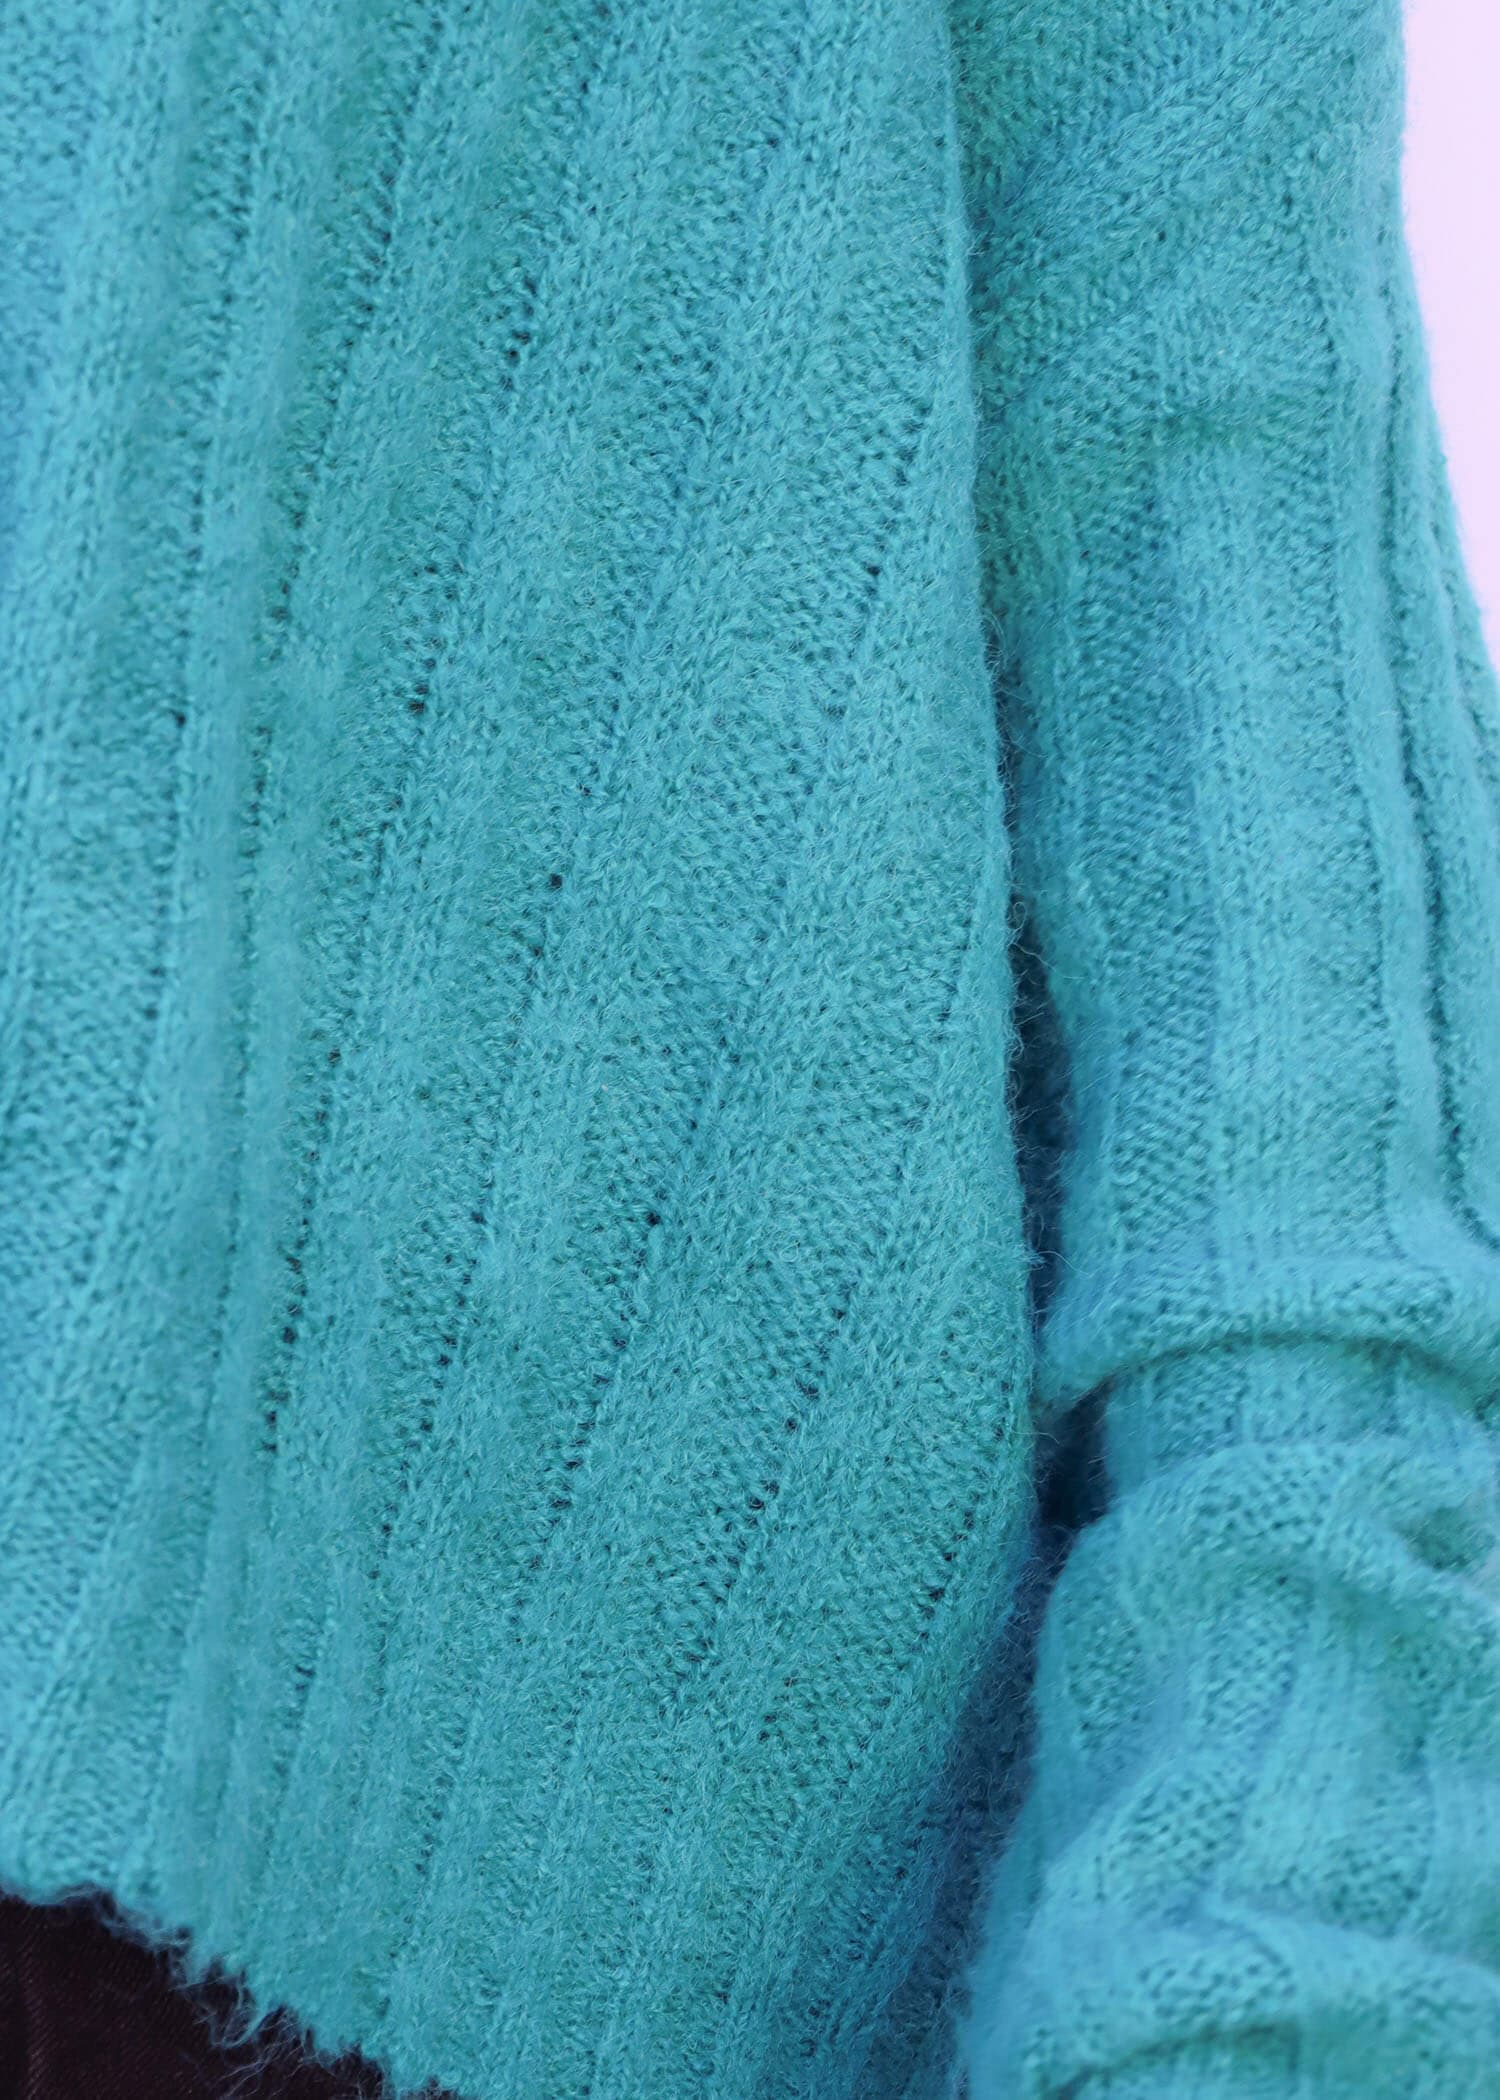 Essential Knit Sweater - Teal Sweater MerciGrace Boutique.